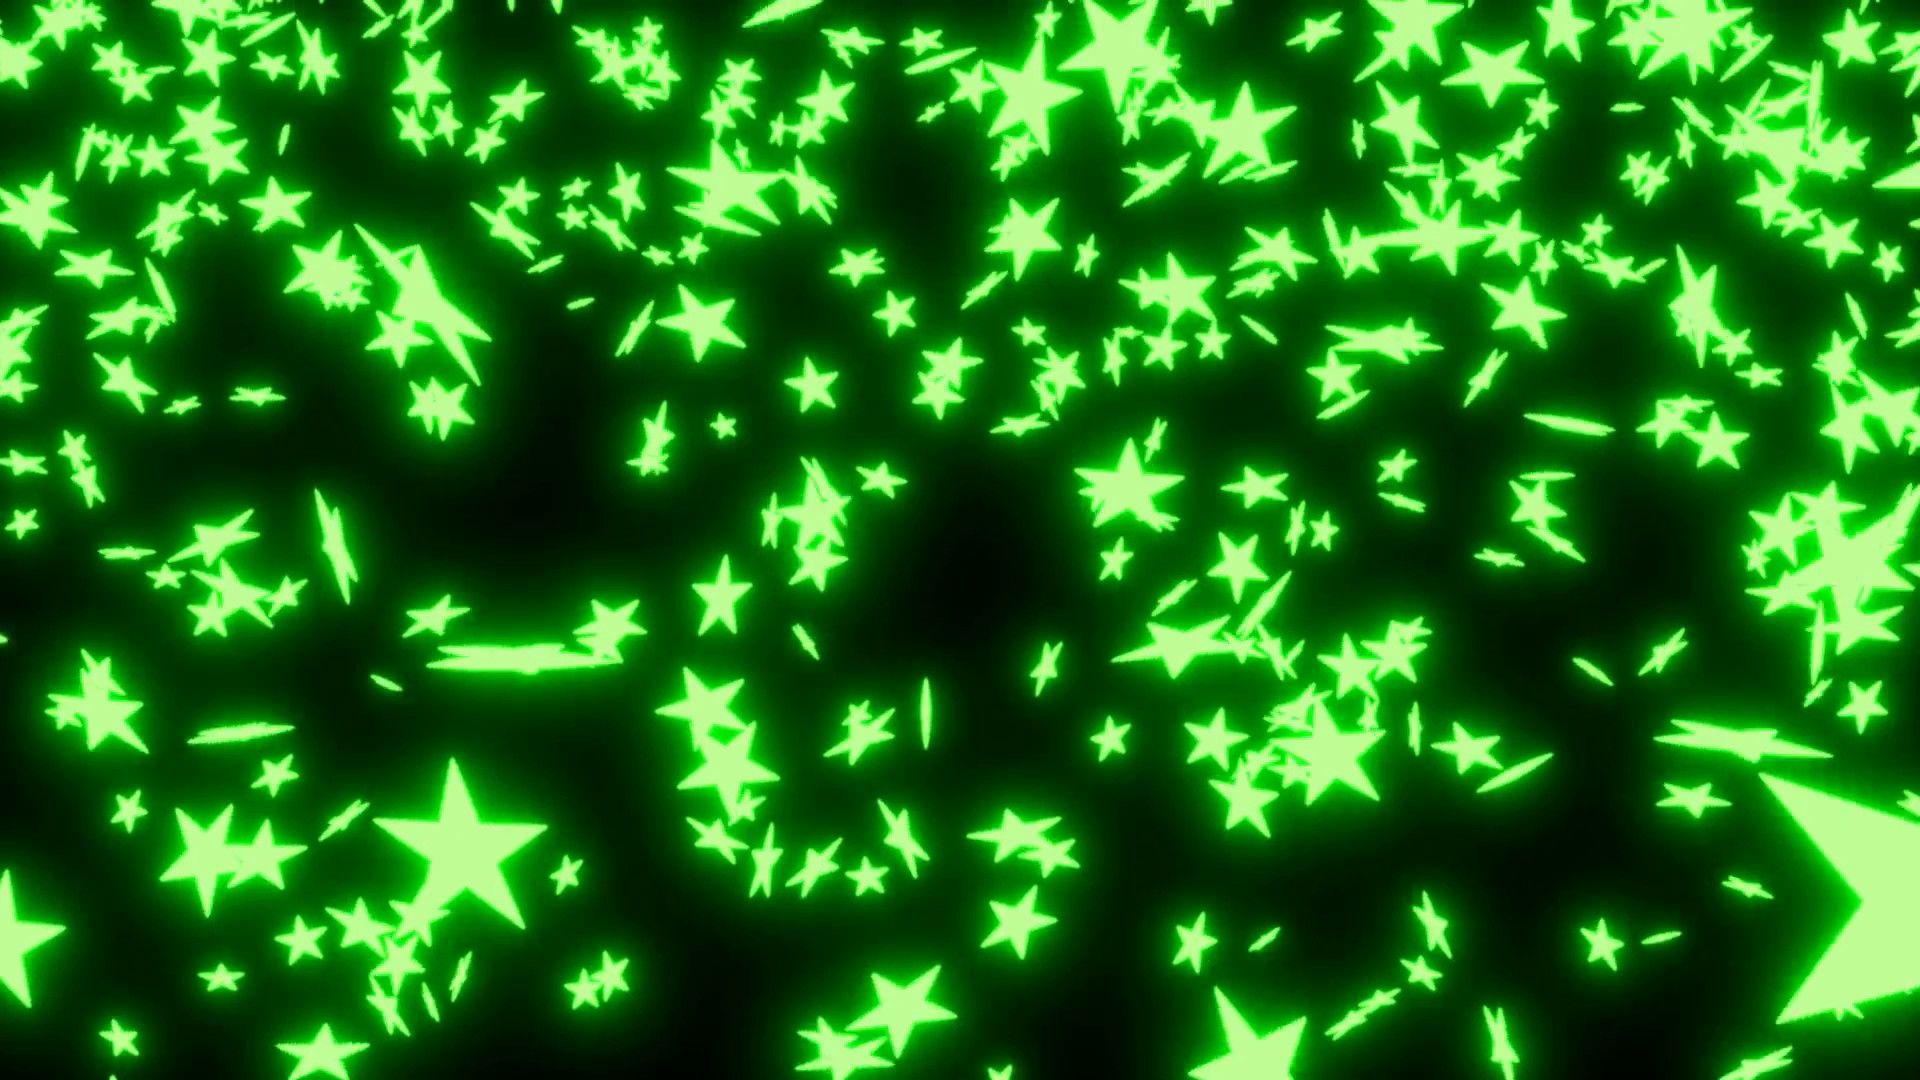 Subscription Library Animated falling neon green stars on black background